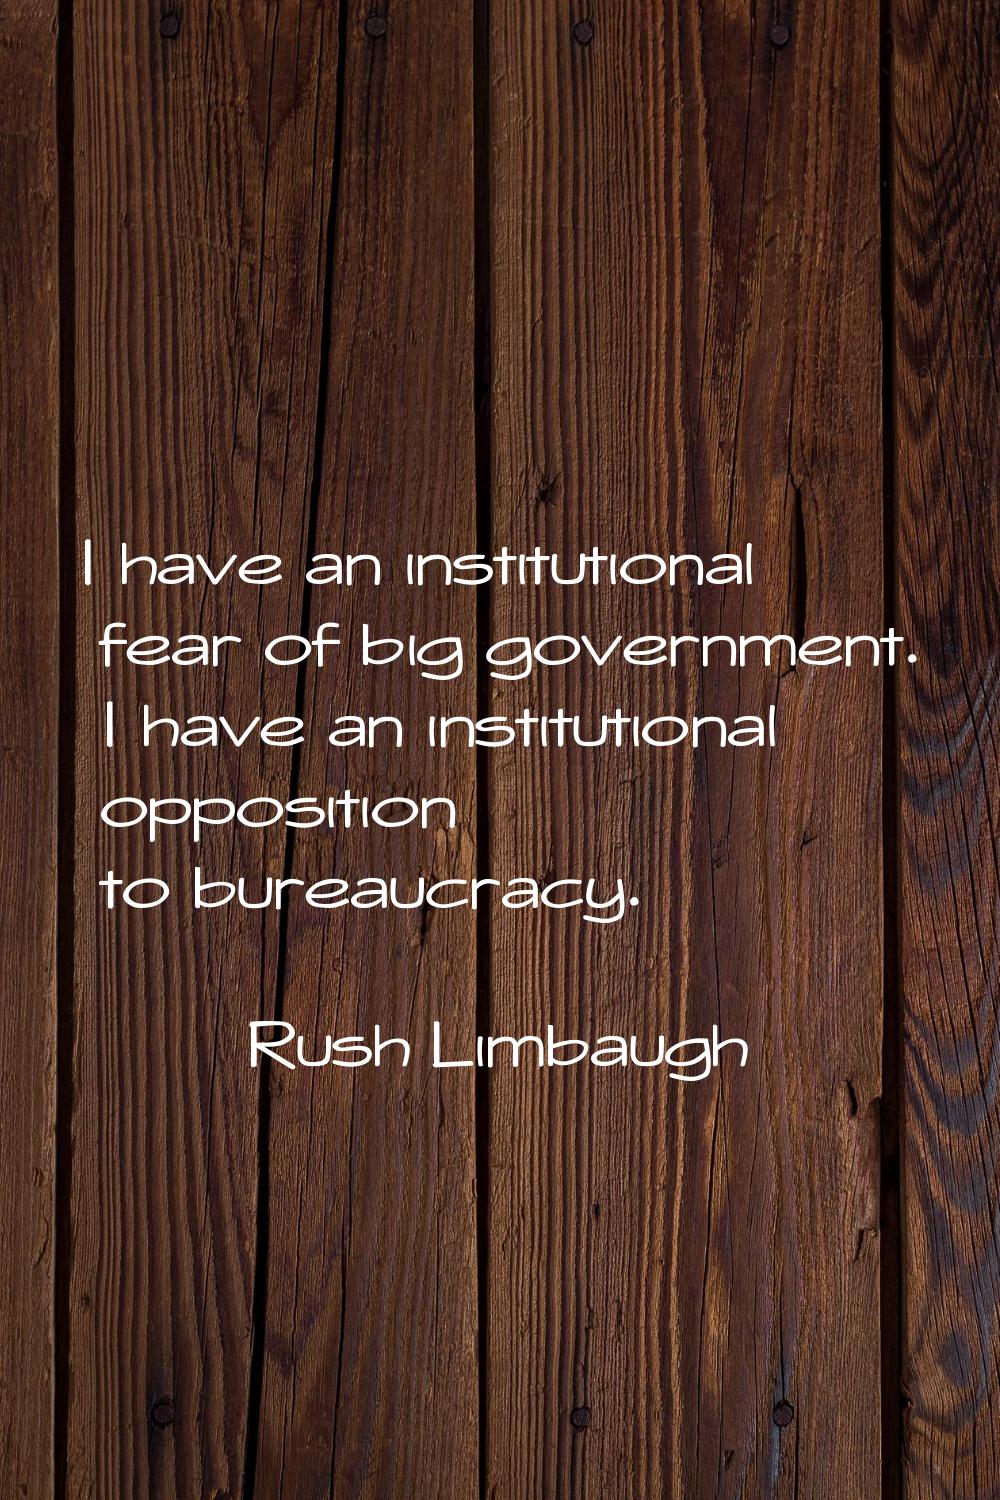 I have an institutional fear of big government. I have an institutional opposition to bureaucracy.